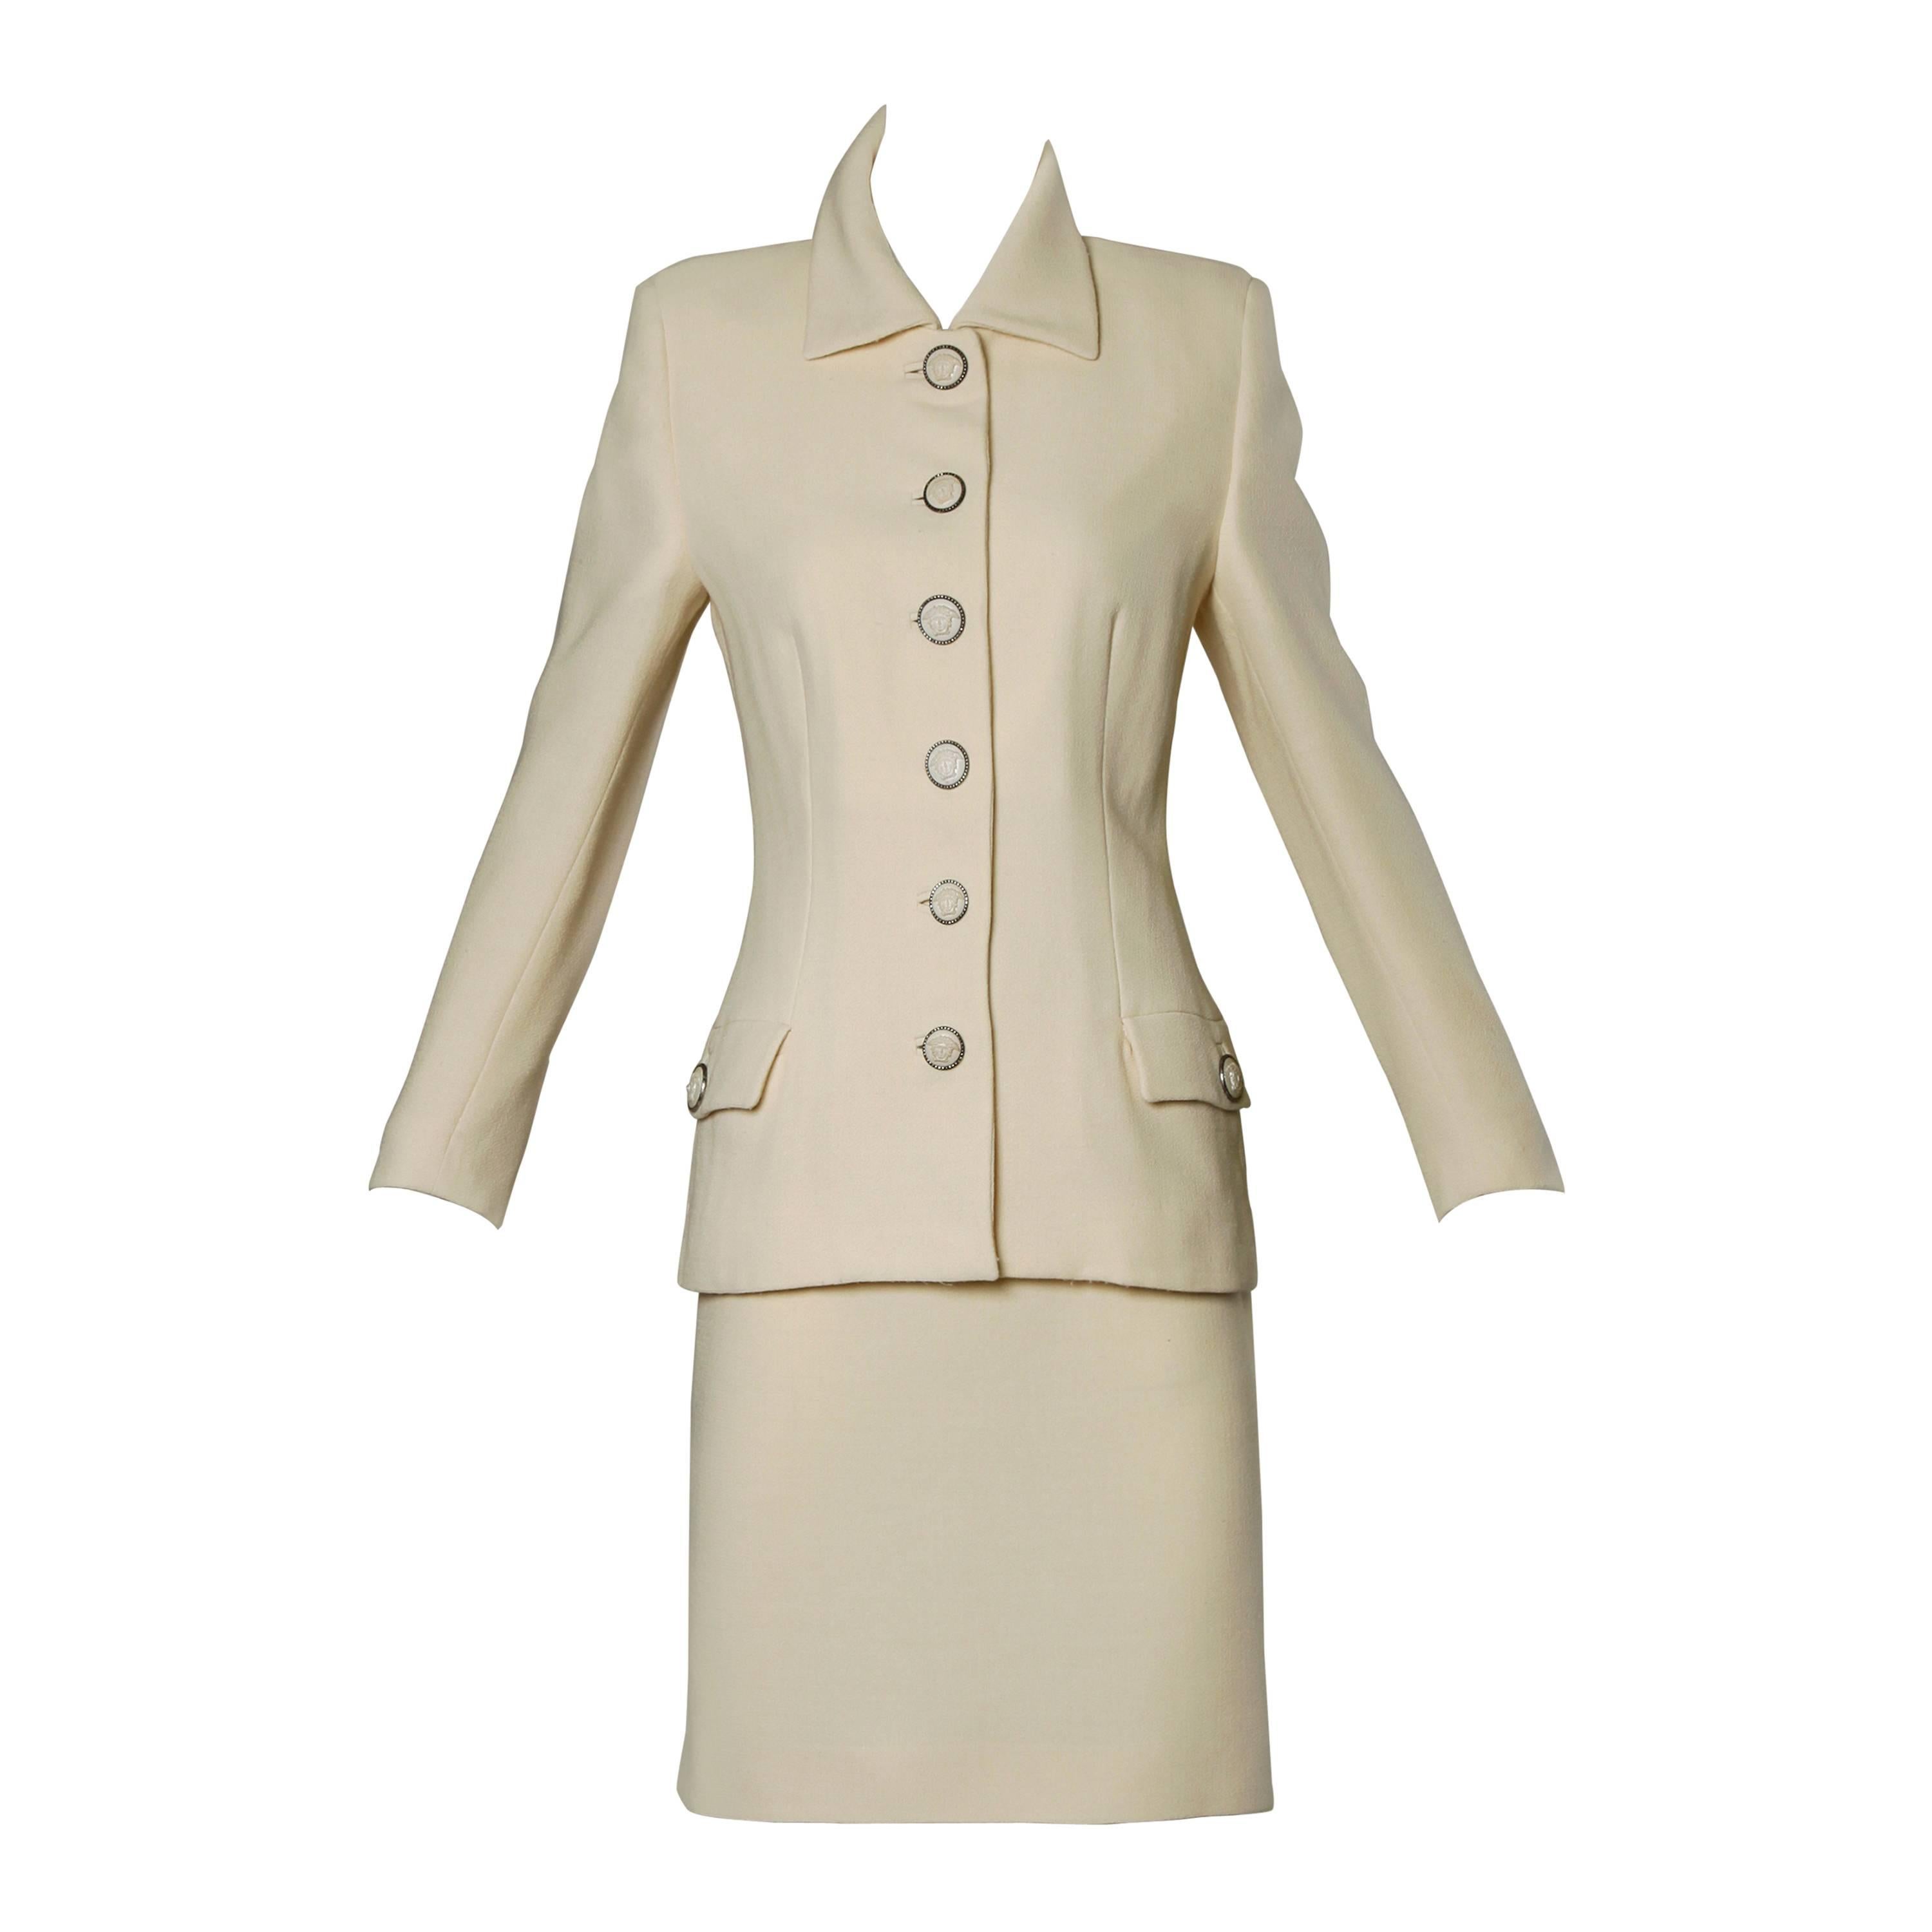 Gianni Versace Couture Vintage 90s Wool Jacket + Skirt Suit with Medusa Buttons